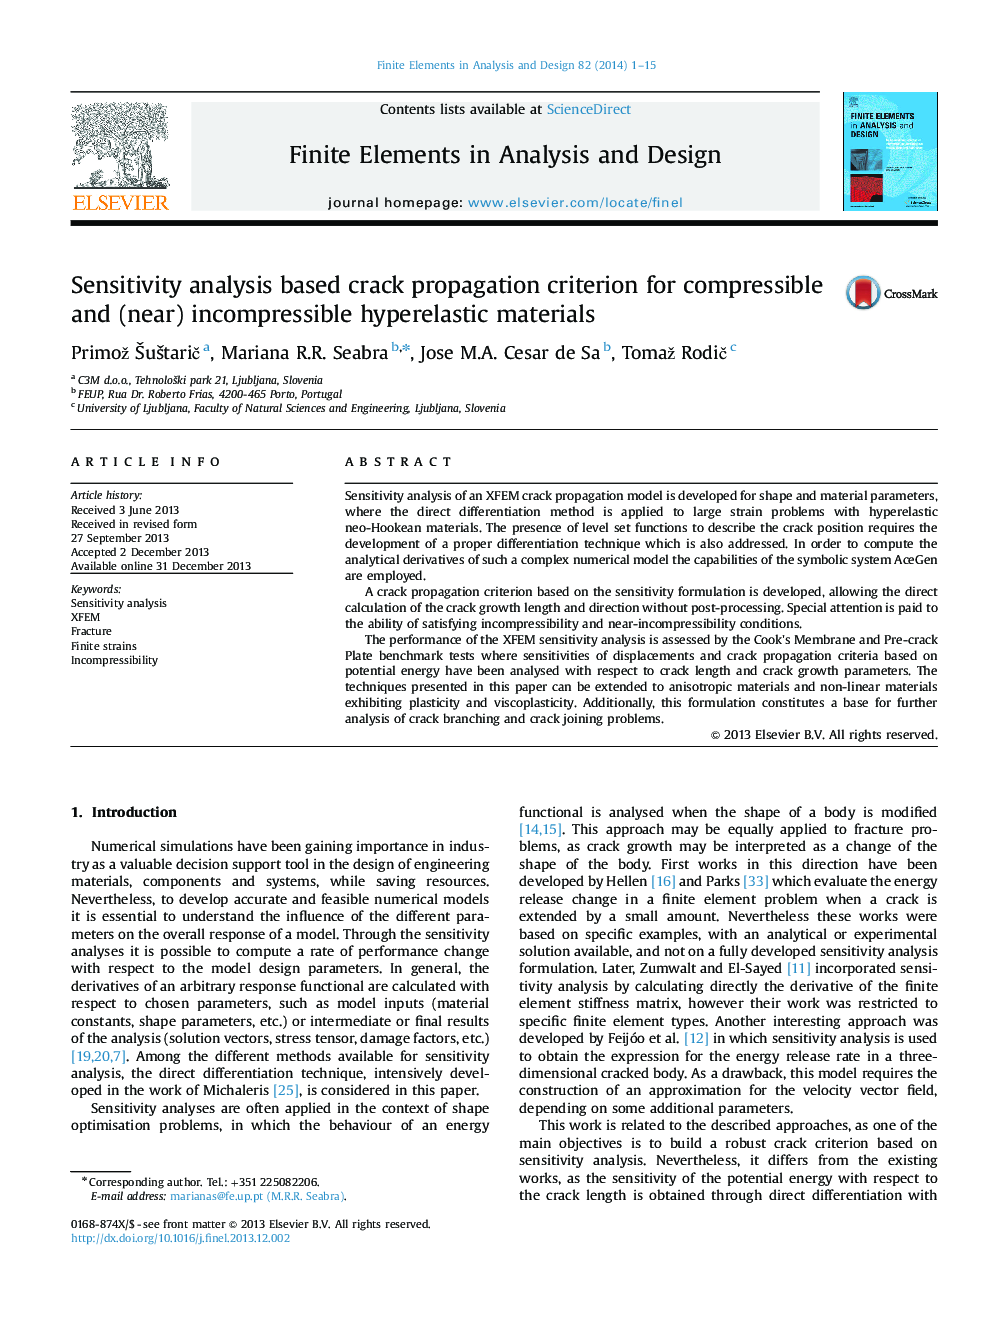 Sensitivity analysis based crack propagation criterion for compressible and (near) incompressible hyperelastic materials